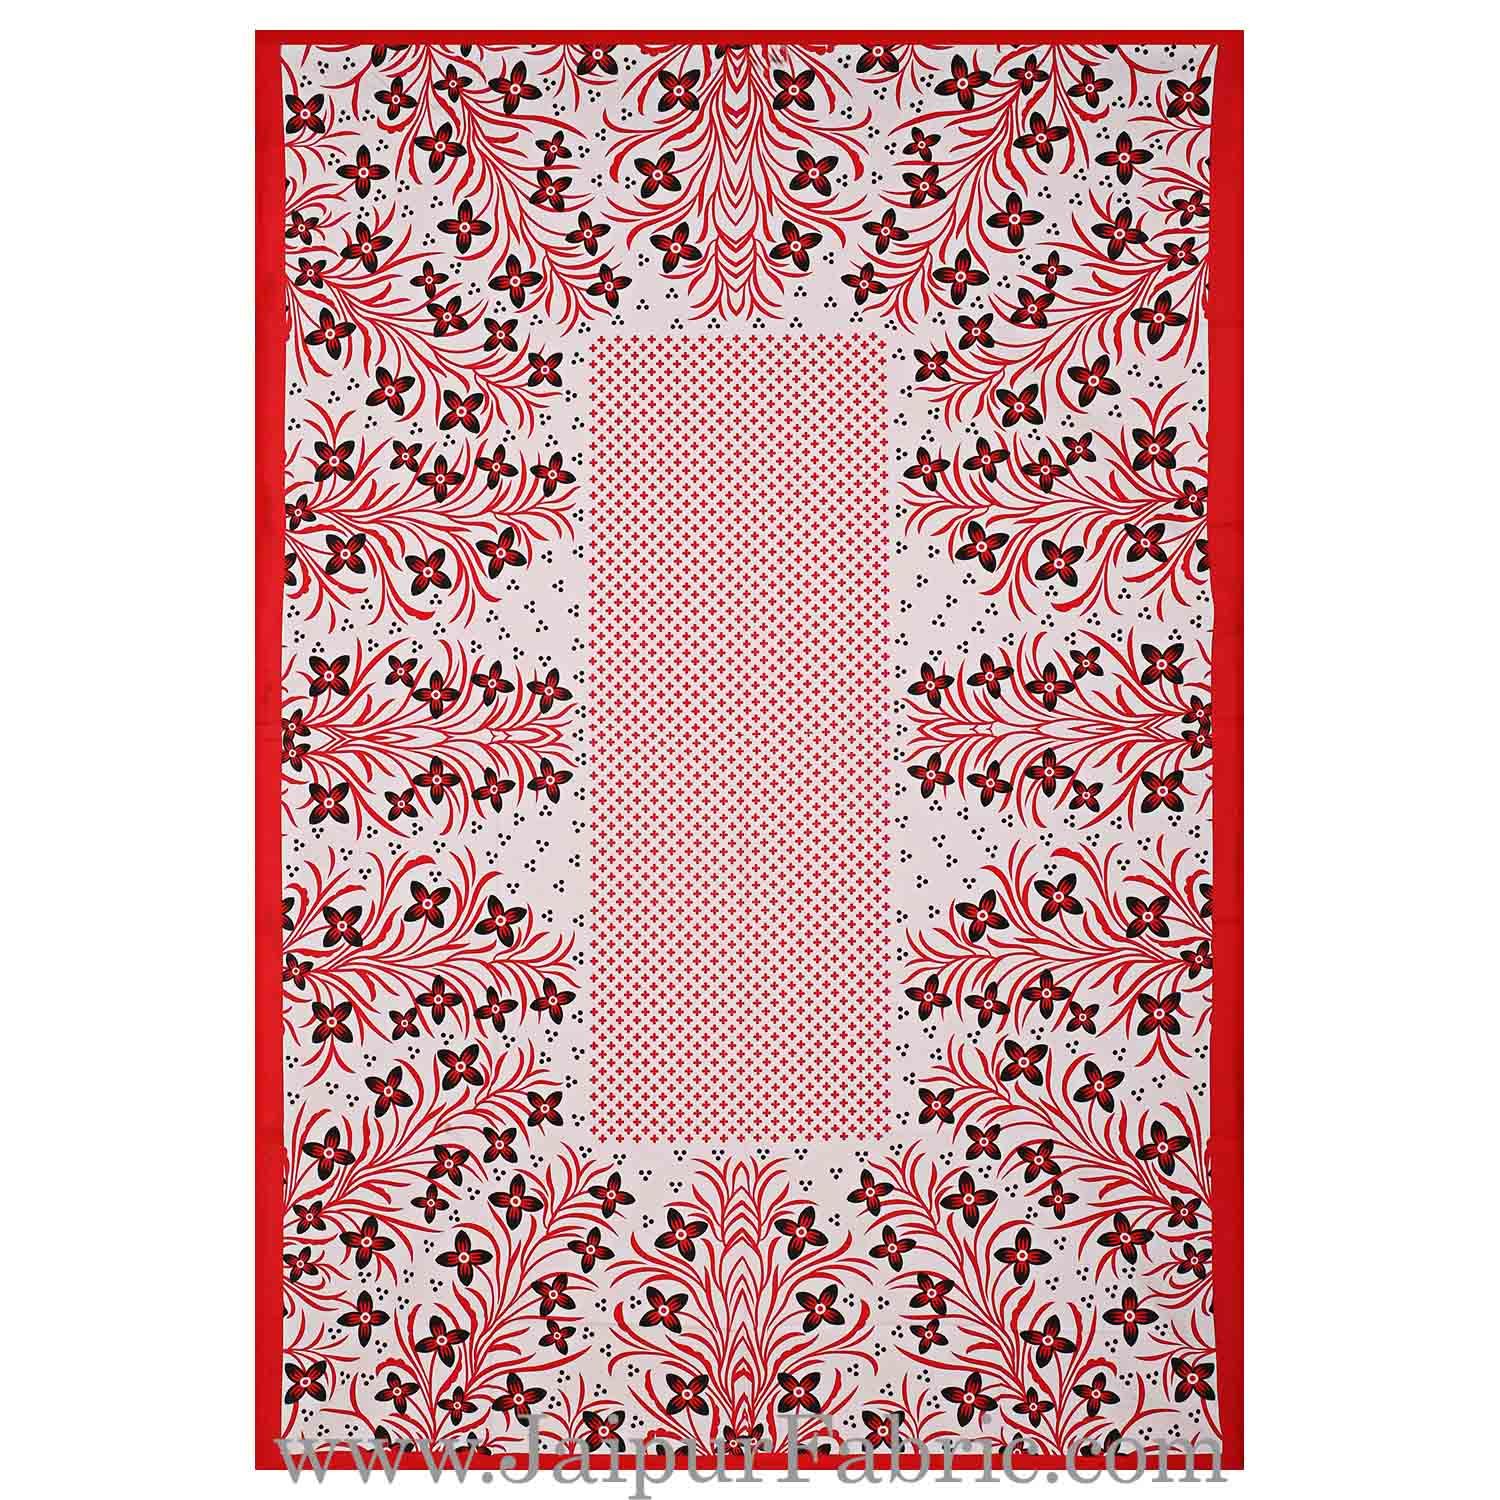 Single Bedsheet Pure Cotton Red Border with Flower and Leaf Pattern